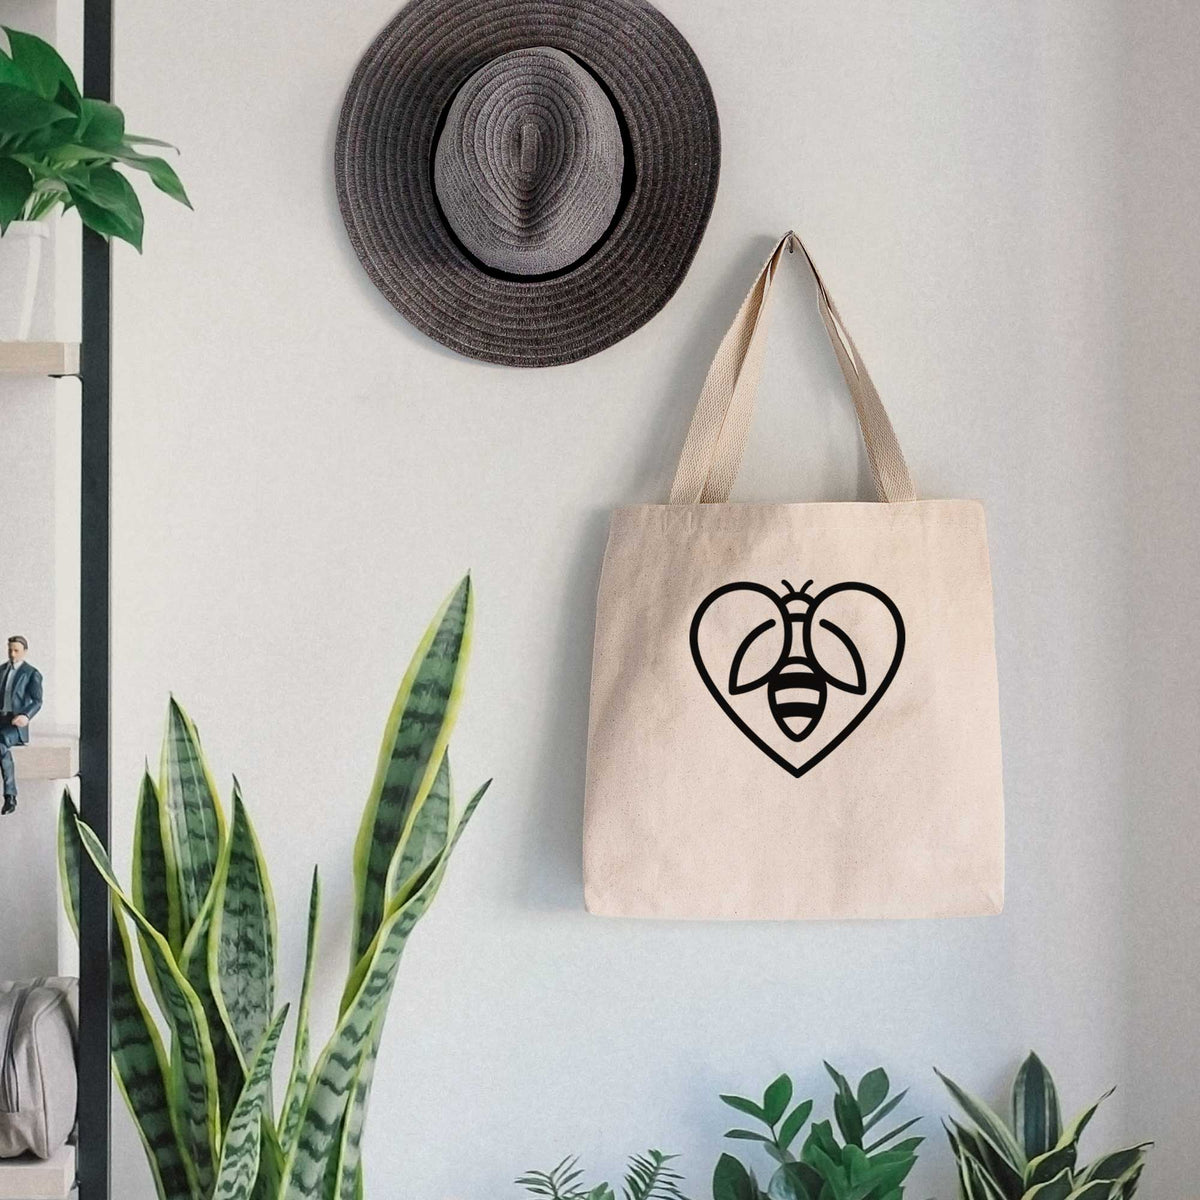 Bee Heart Icon - Tote Bag